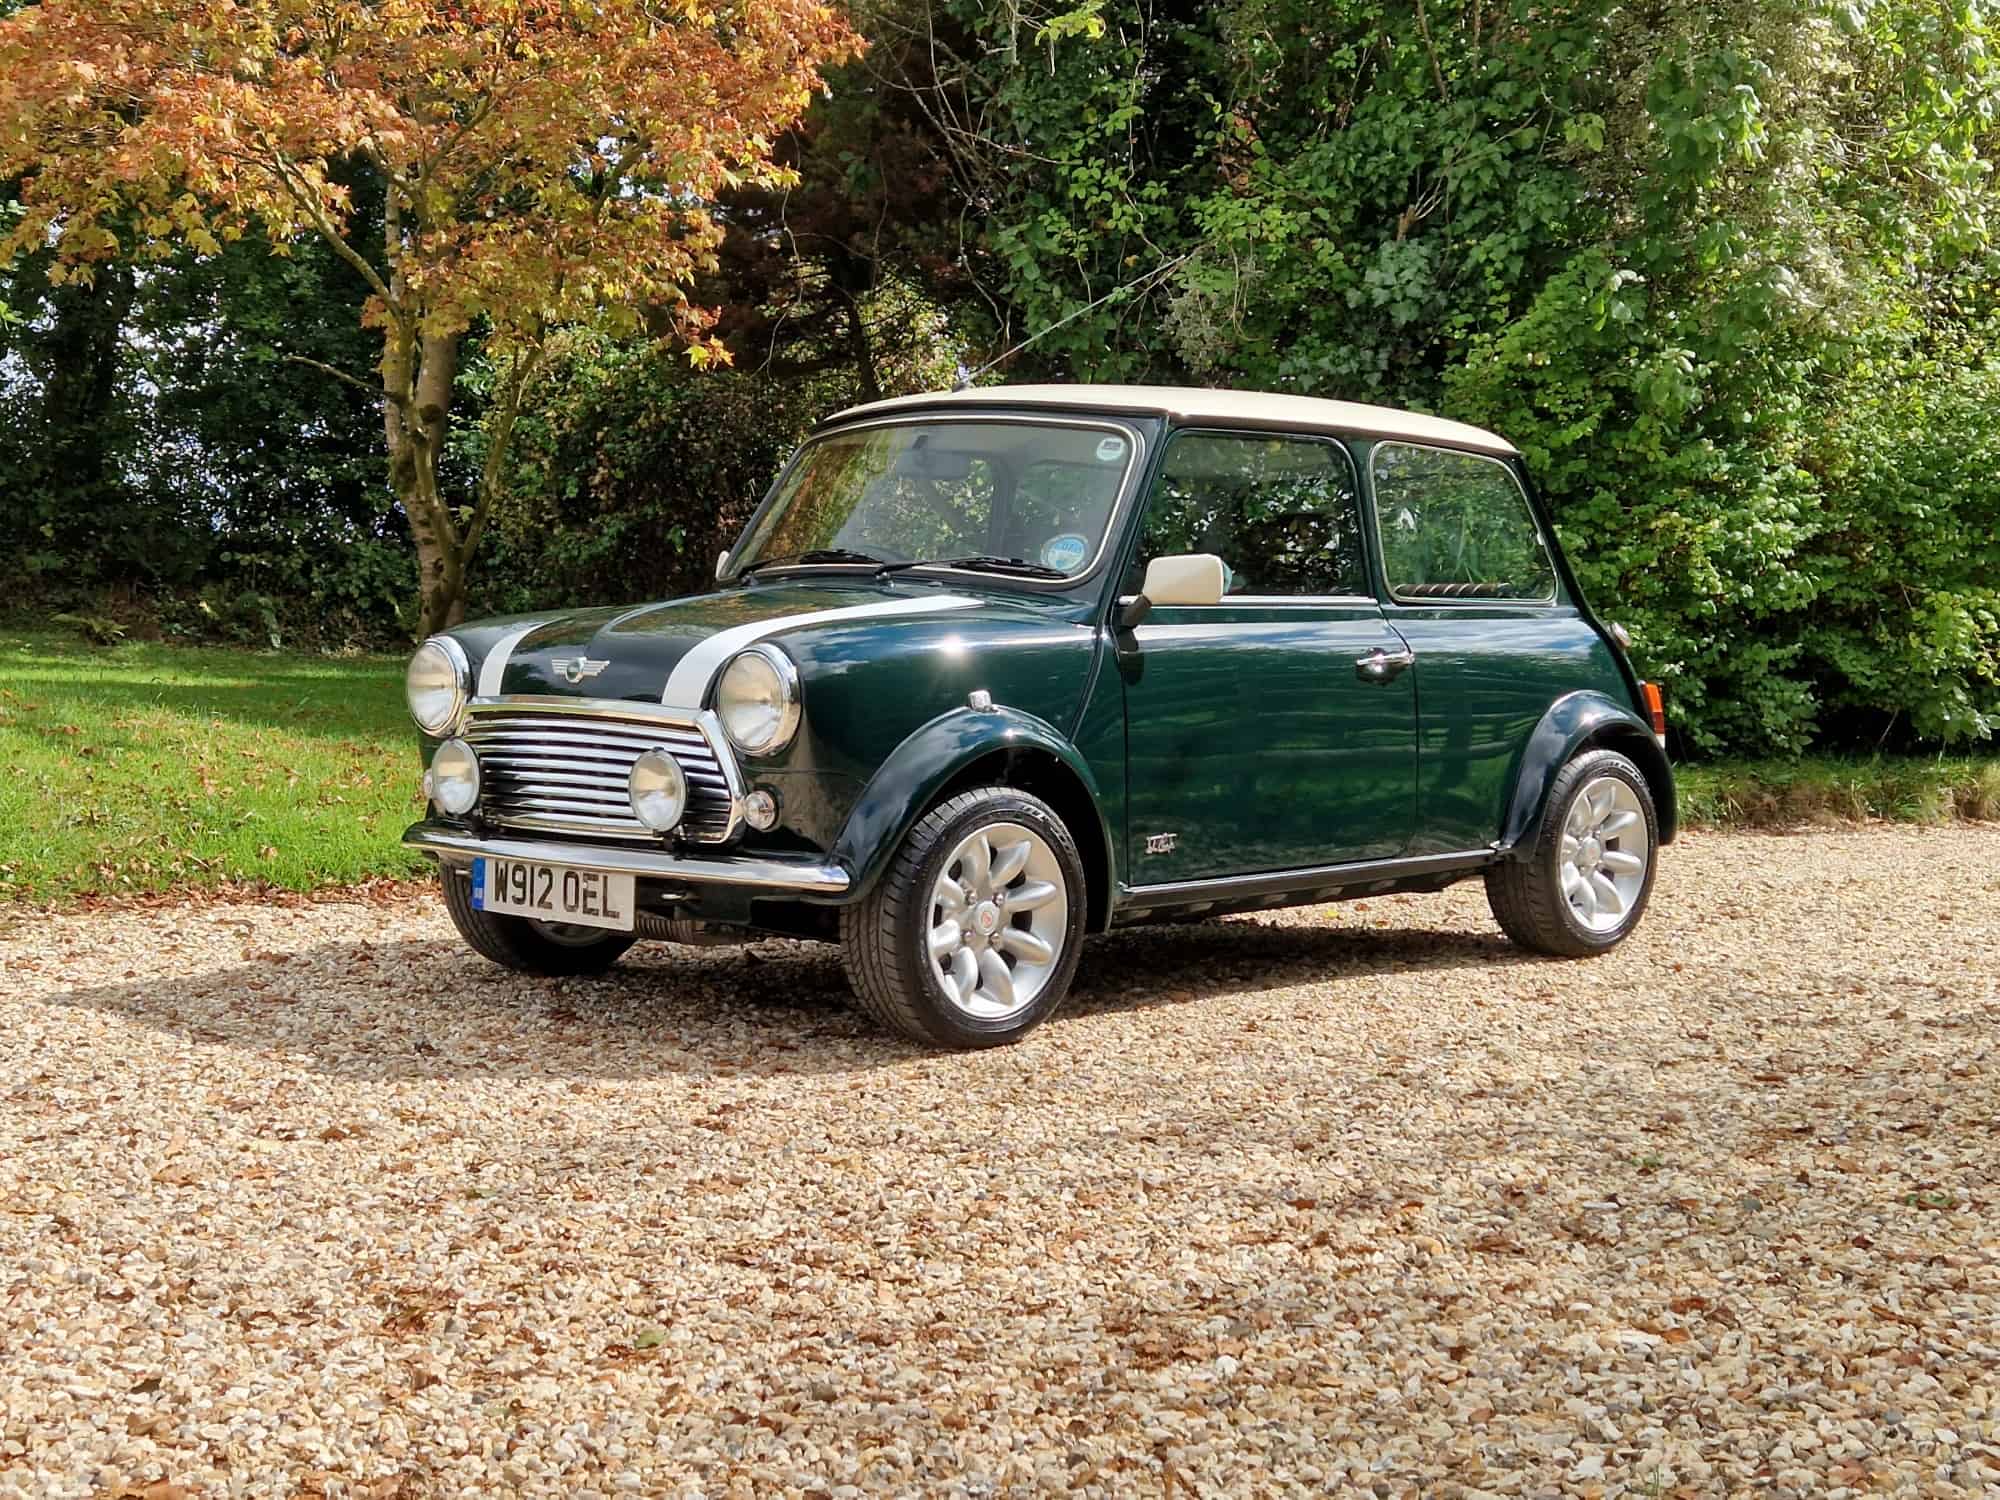 ** NOW SOLD ** 2000 W Mini John Cooper LE 1 of 300 Ever Made ‘One Owner’ New Heritage Body.